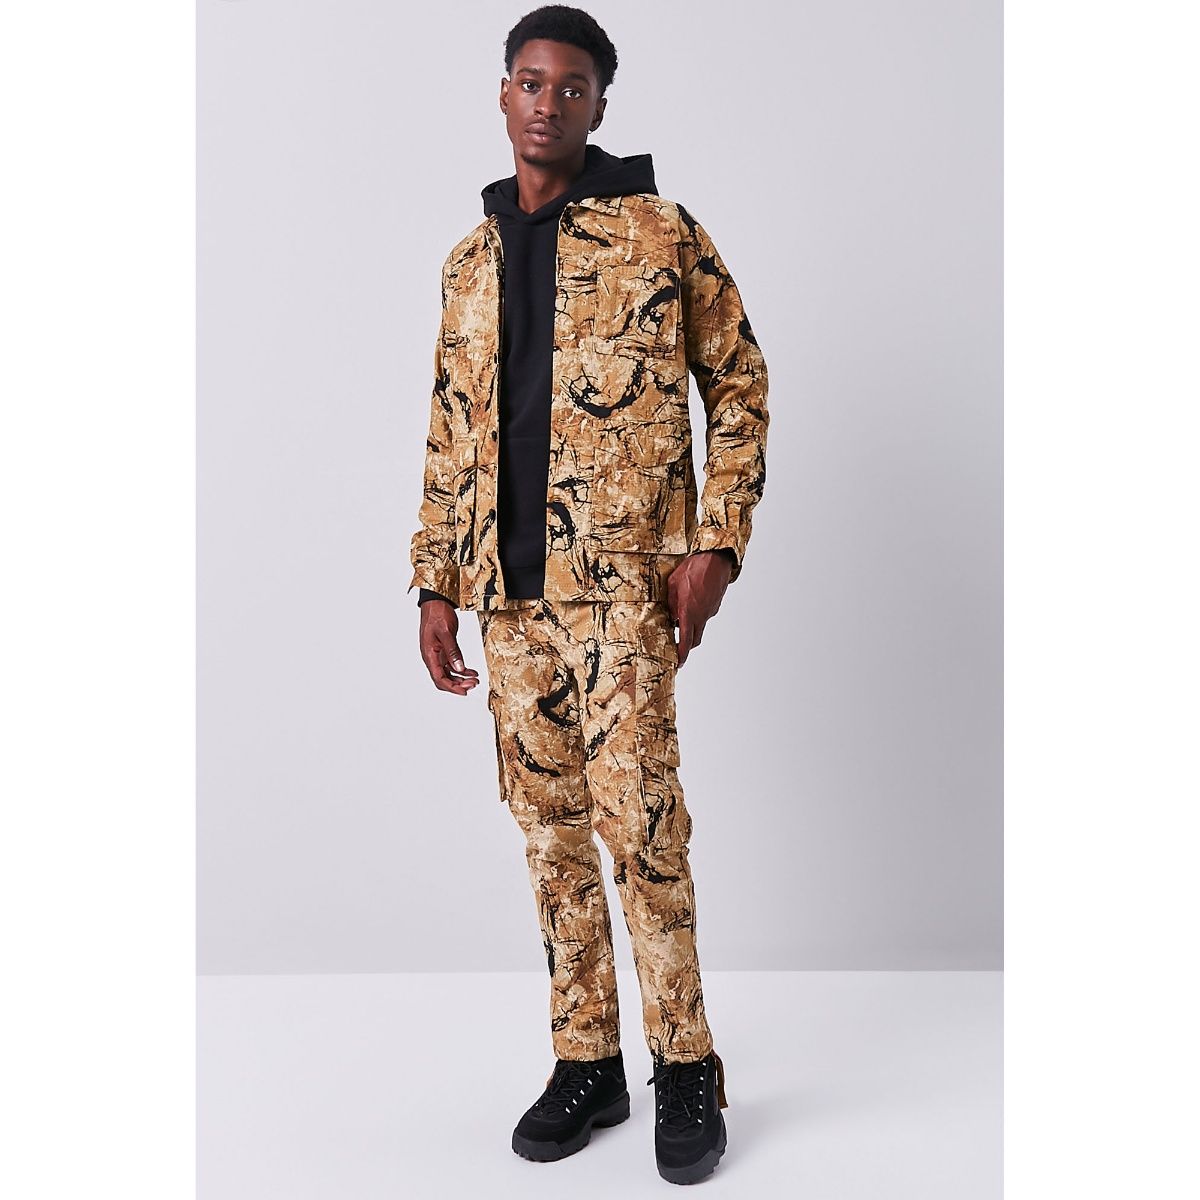 Forever 21 Multi Printed Camo Print Cargo Pants Buy Forever 21 Multi Printed  Camo Print Cargo Pants Online at Best Price in India  NykaaMan